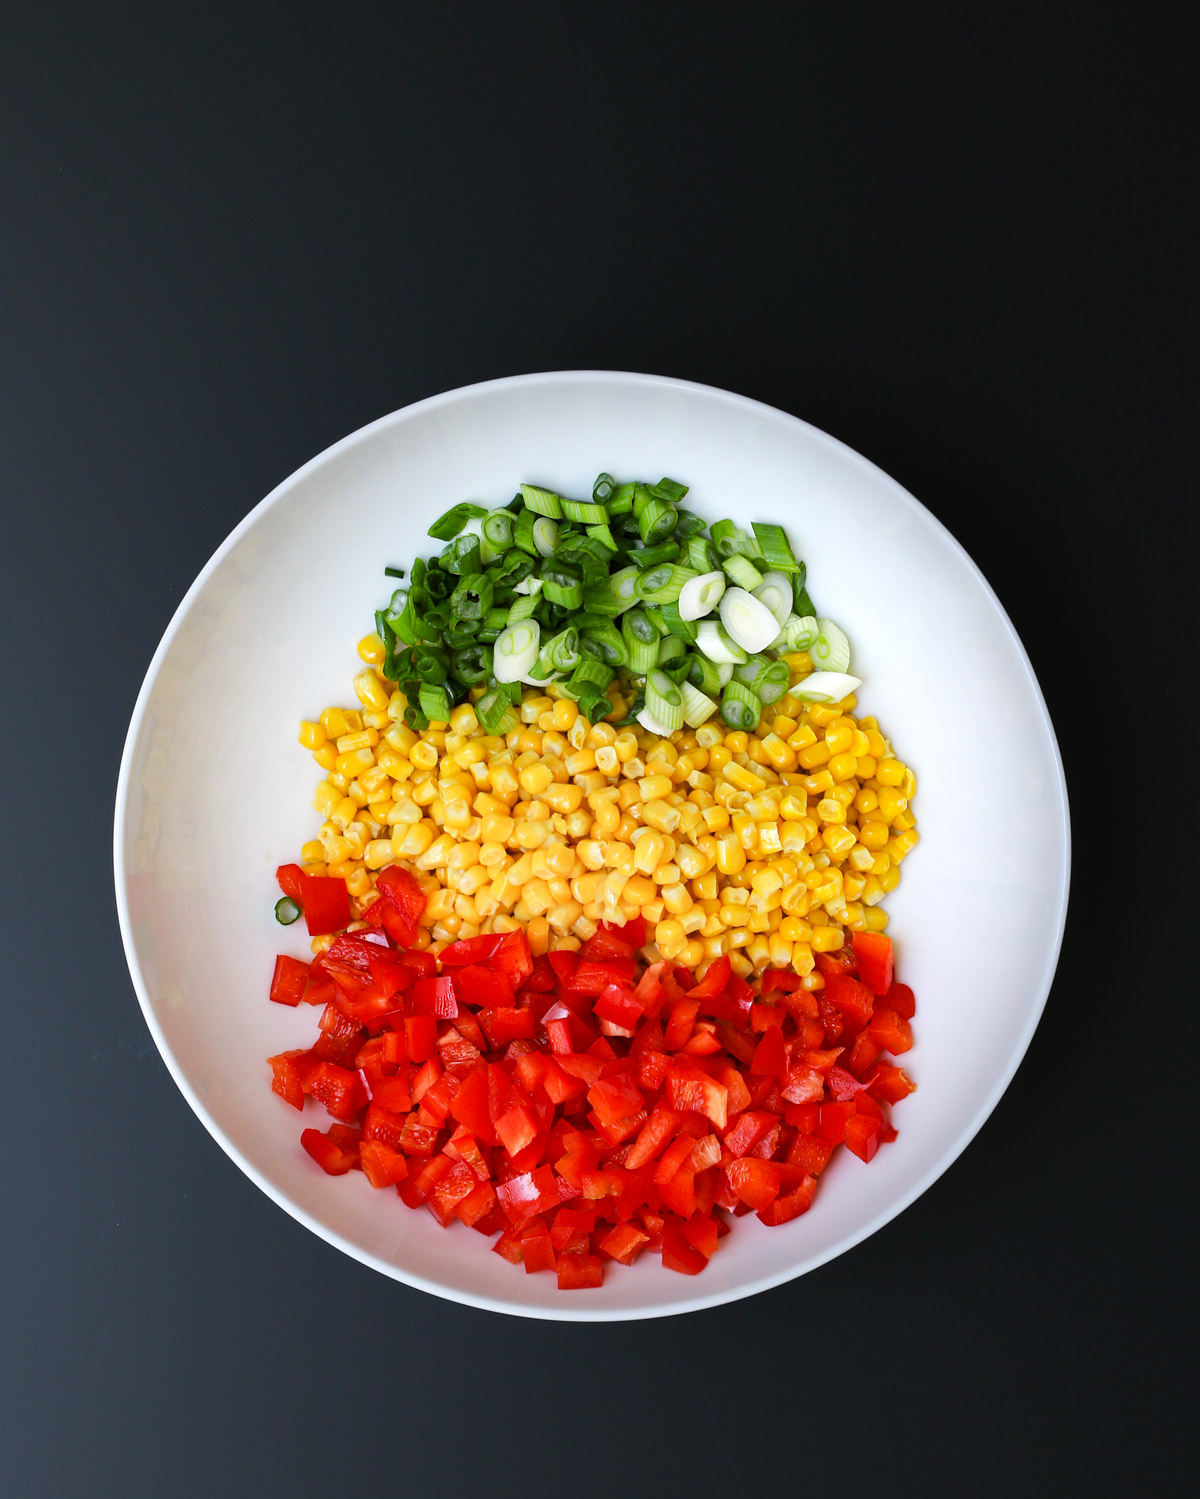 green onion, corn kernels, and diced red pepper in white mixing bowl.